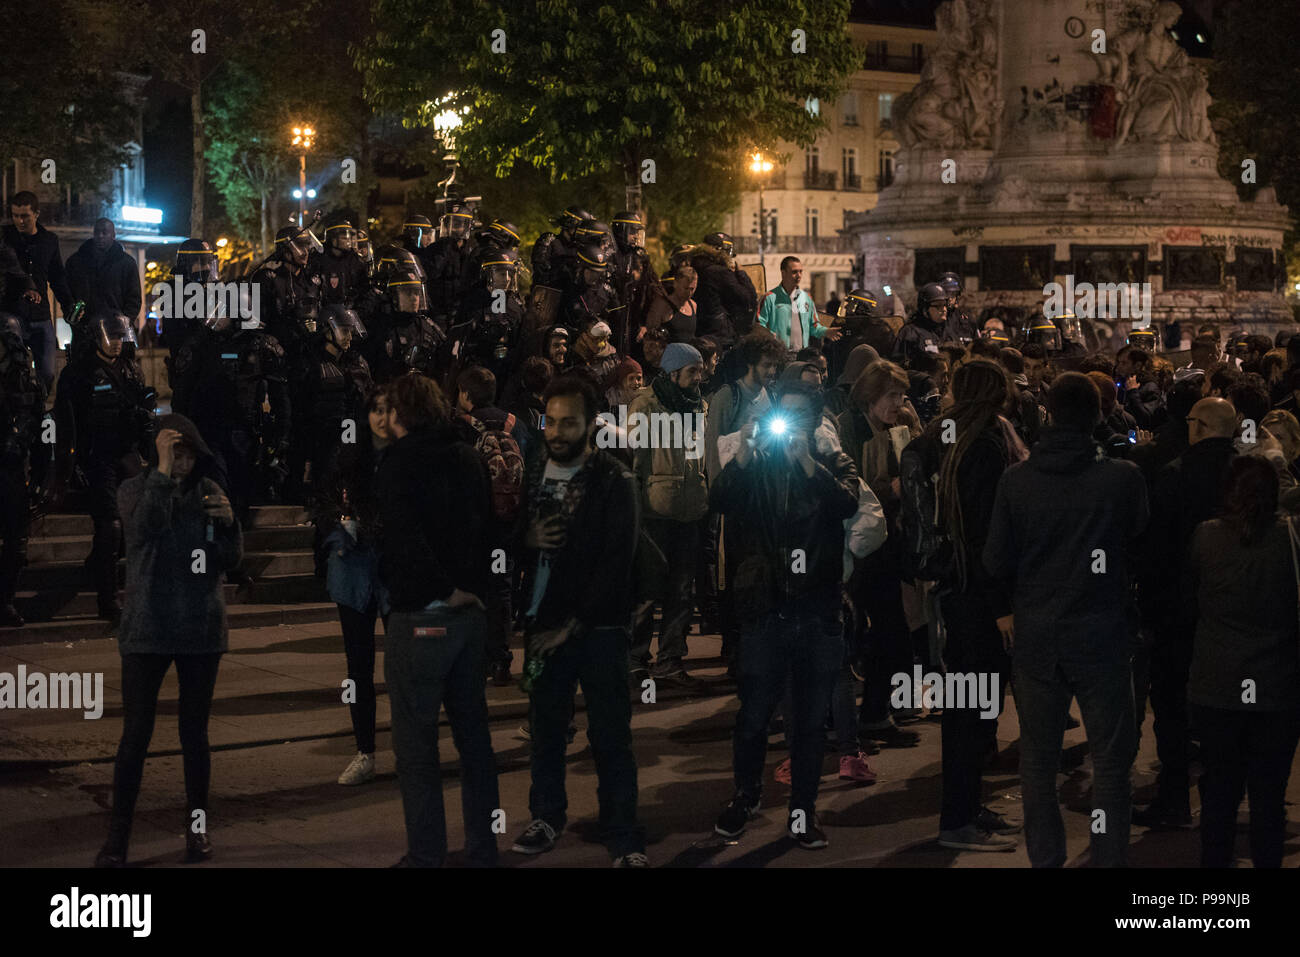 Place de la République, Paris, France. 16th May, 2016. Several thousand supporters of the French youth protest movement Nuit Debout took part in a glo Stock Photo